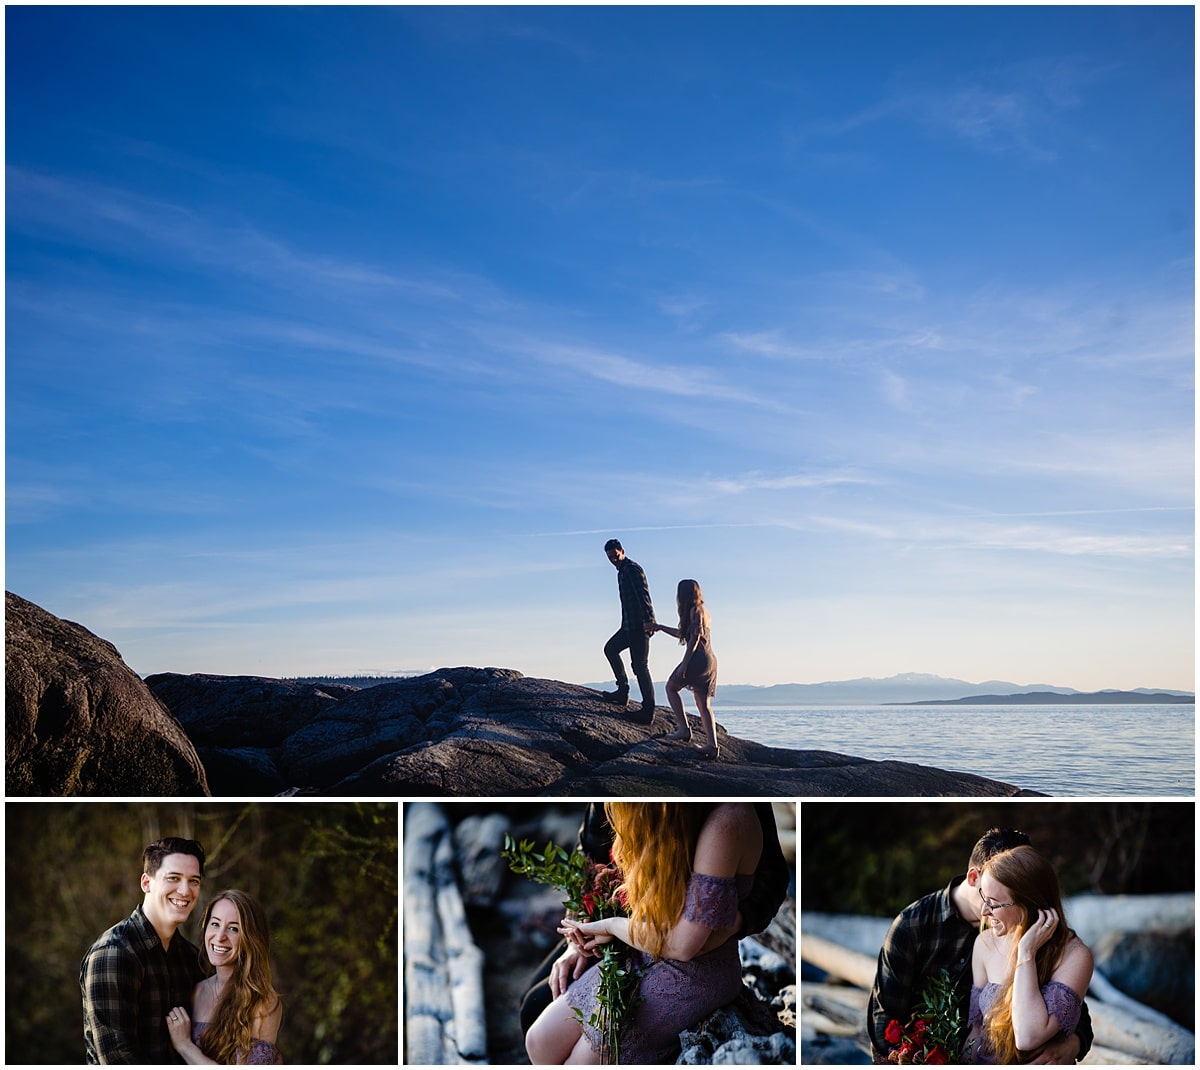 A newly engaged couple explores the rocks around Secret Cove in Sechelt, BC and poses for engagement photographs on the beach